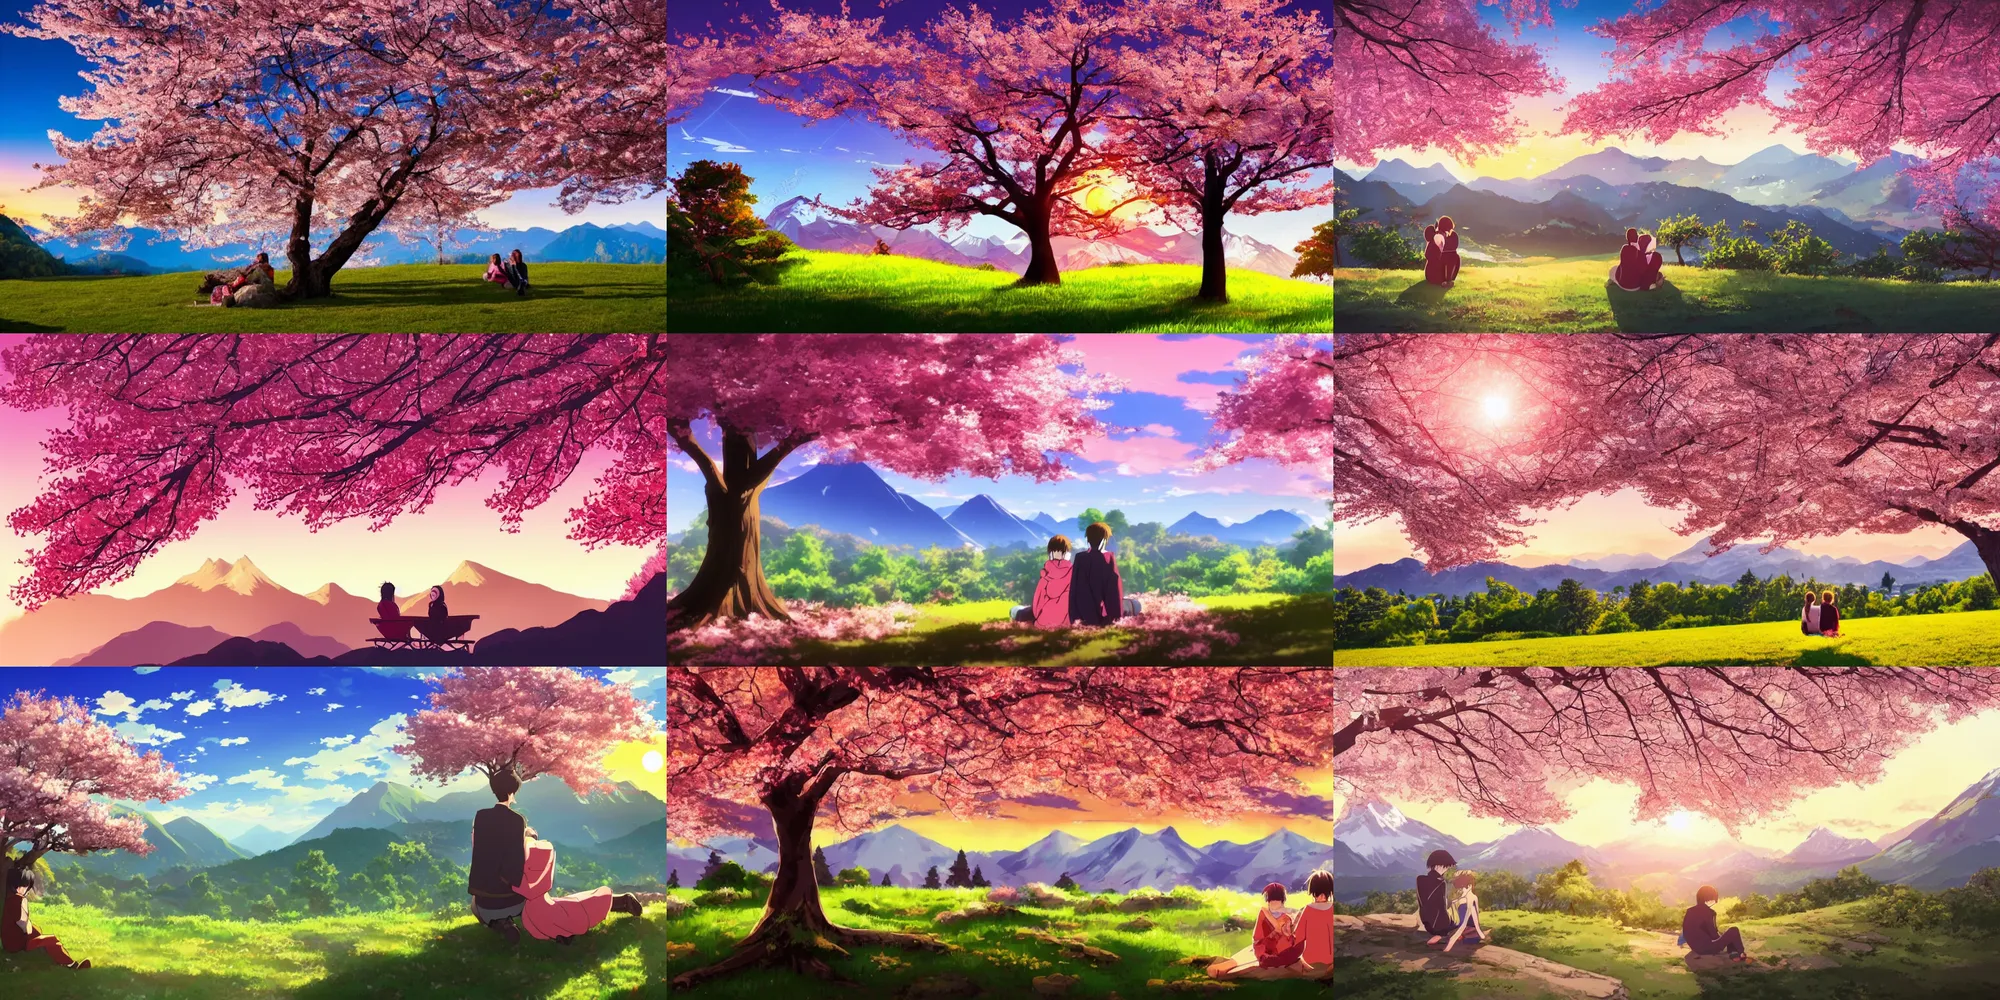 Image similar to A beautiful landscape, trees with cherry blossoms in the foreground, mountains and sunset in the background. Under a tree sits a young couple, anime style